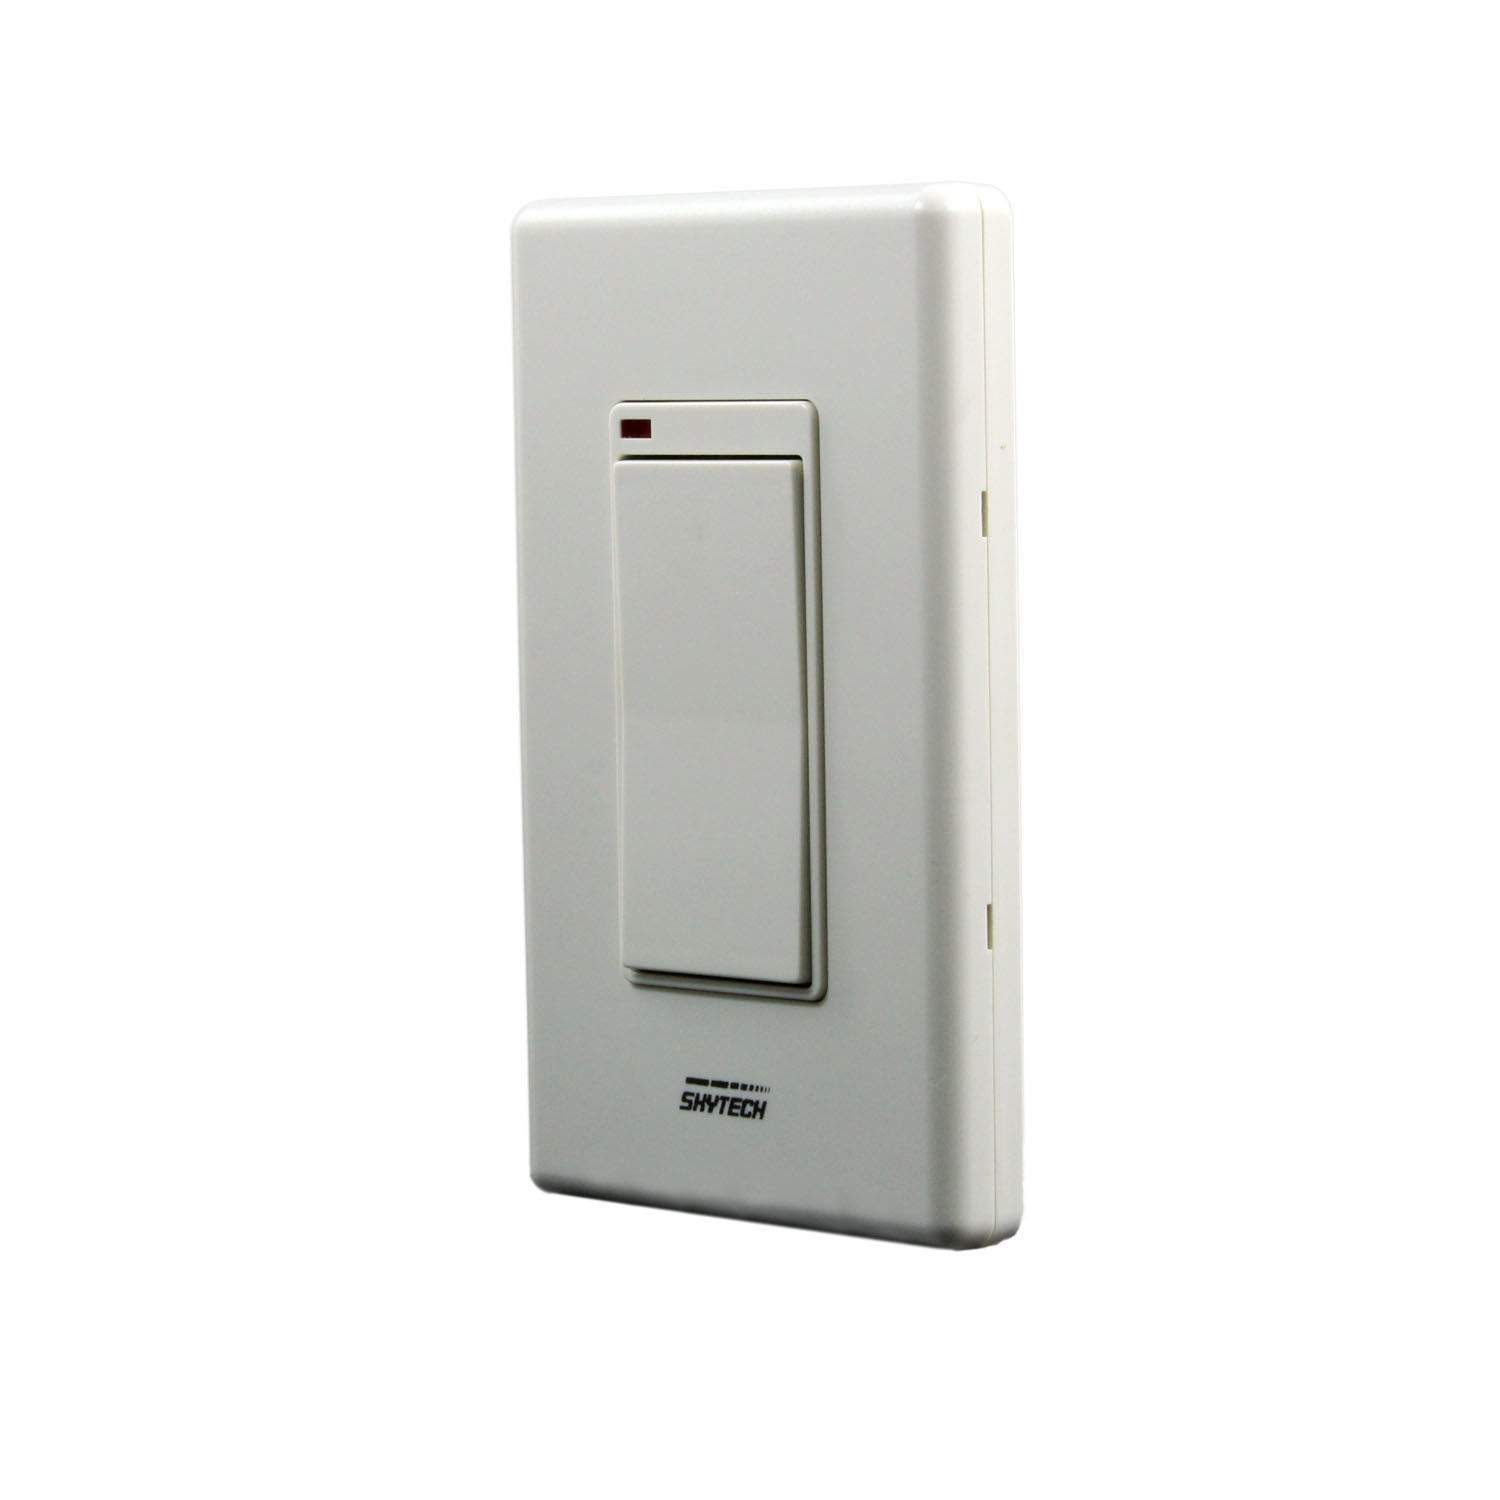 Skytech 1001D-A Fireplace Remote Control System with Wireless Wall Mounted On/Off Switch